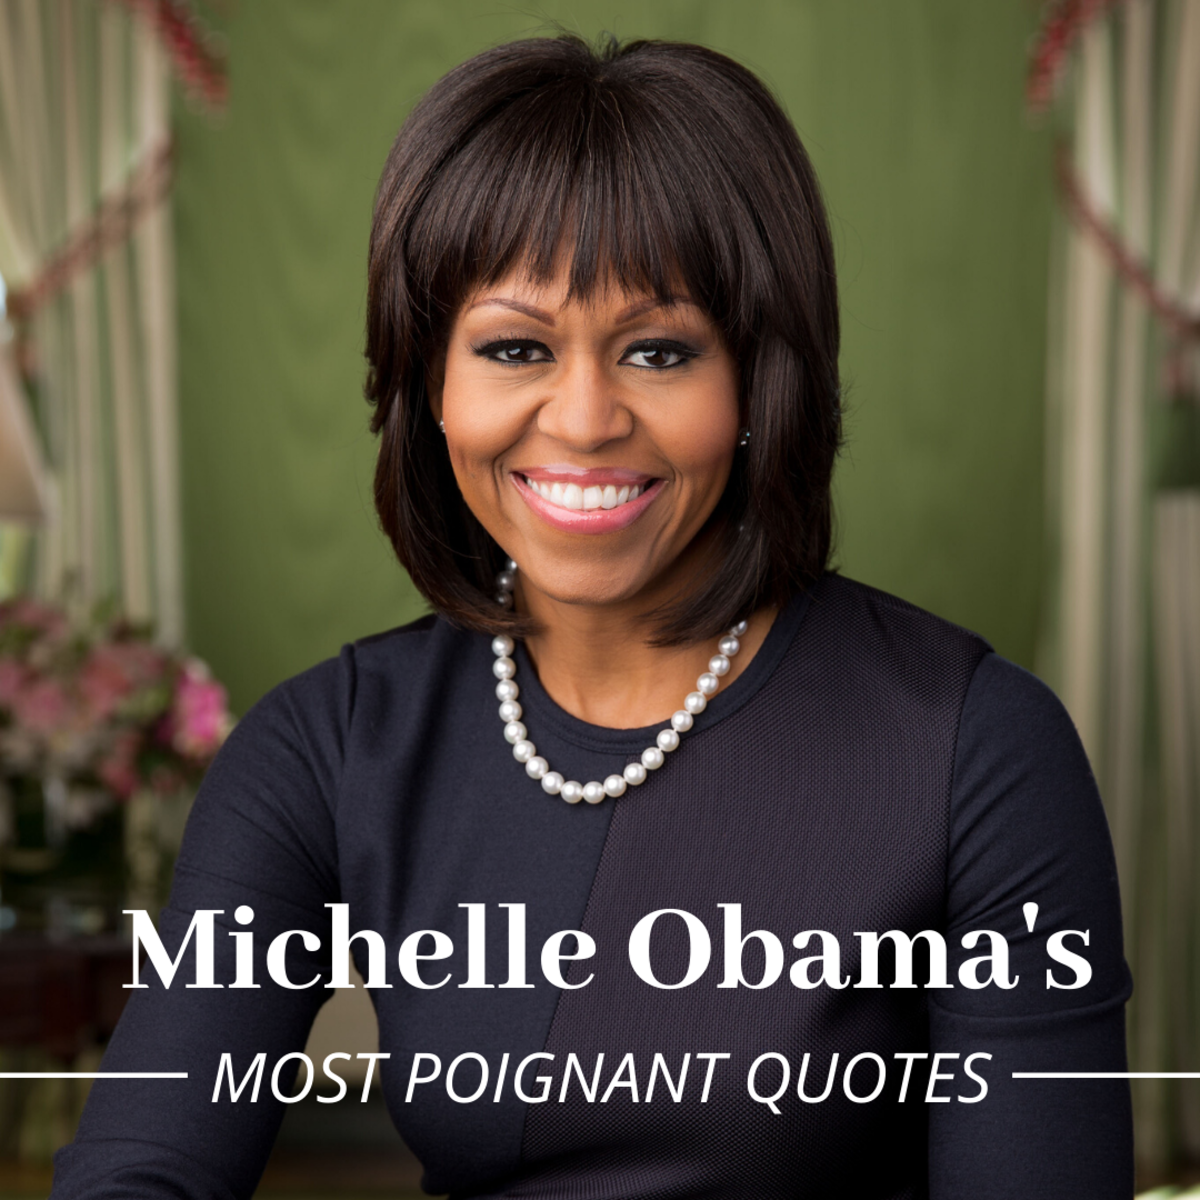 Michelle Obama's Most Poignant Quotes (With Commentary)